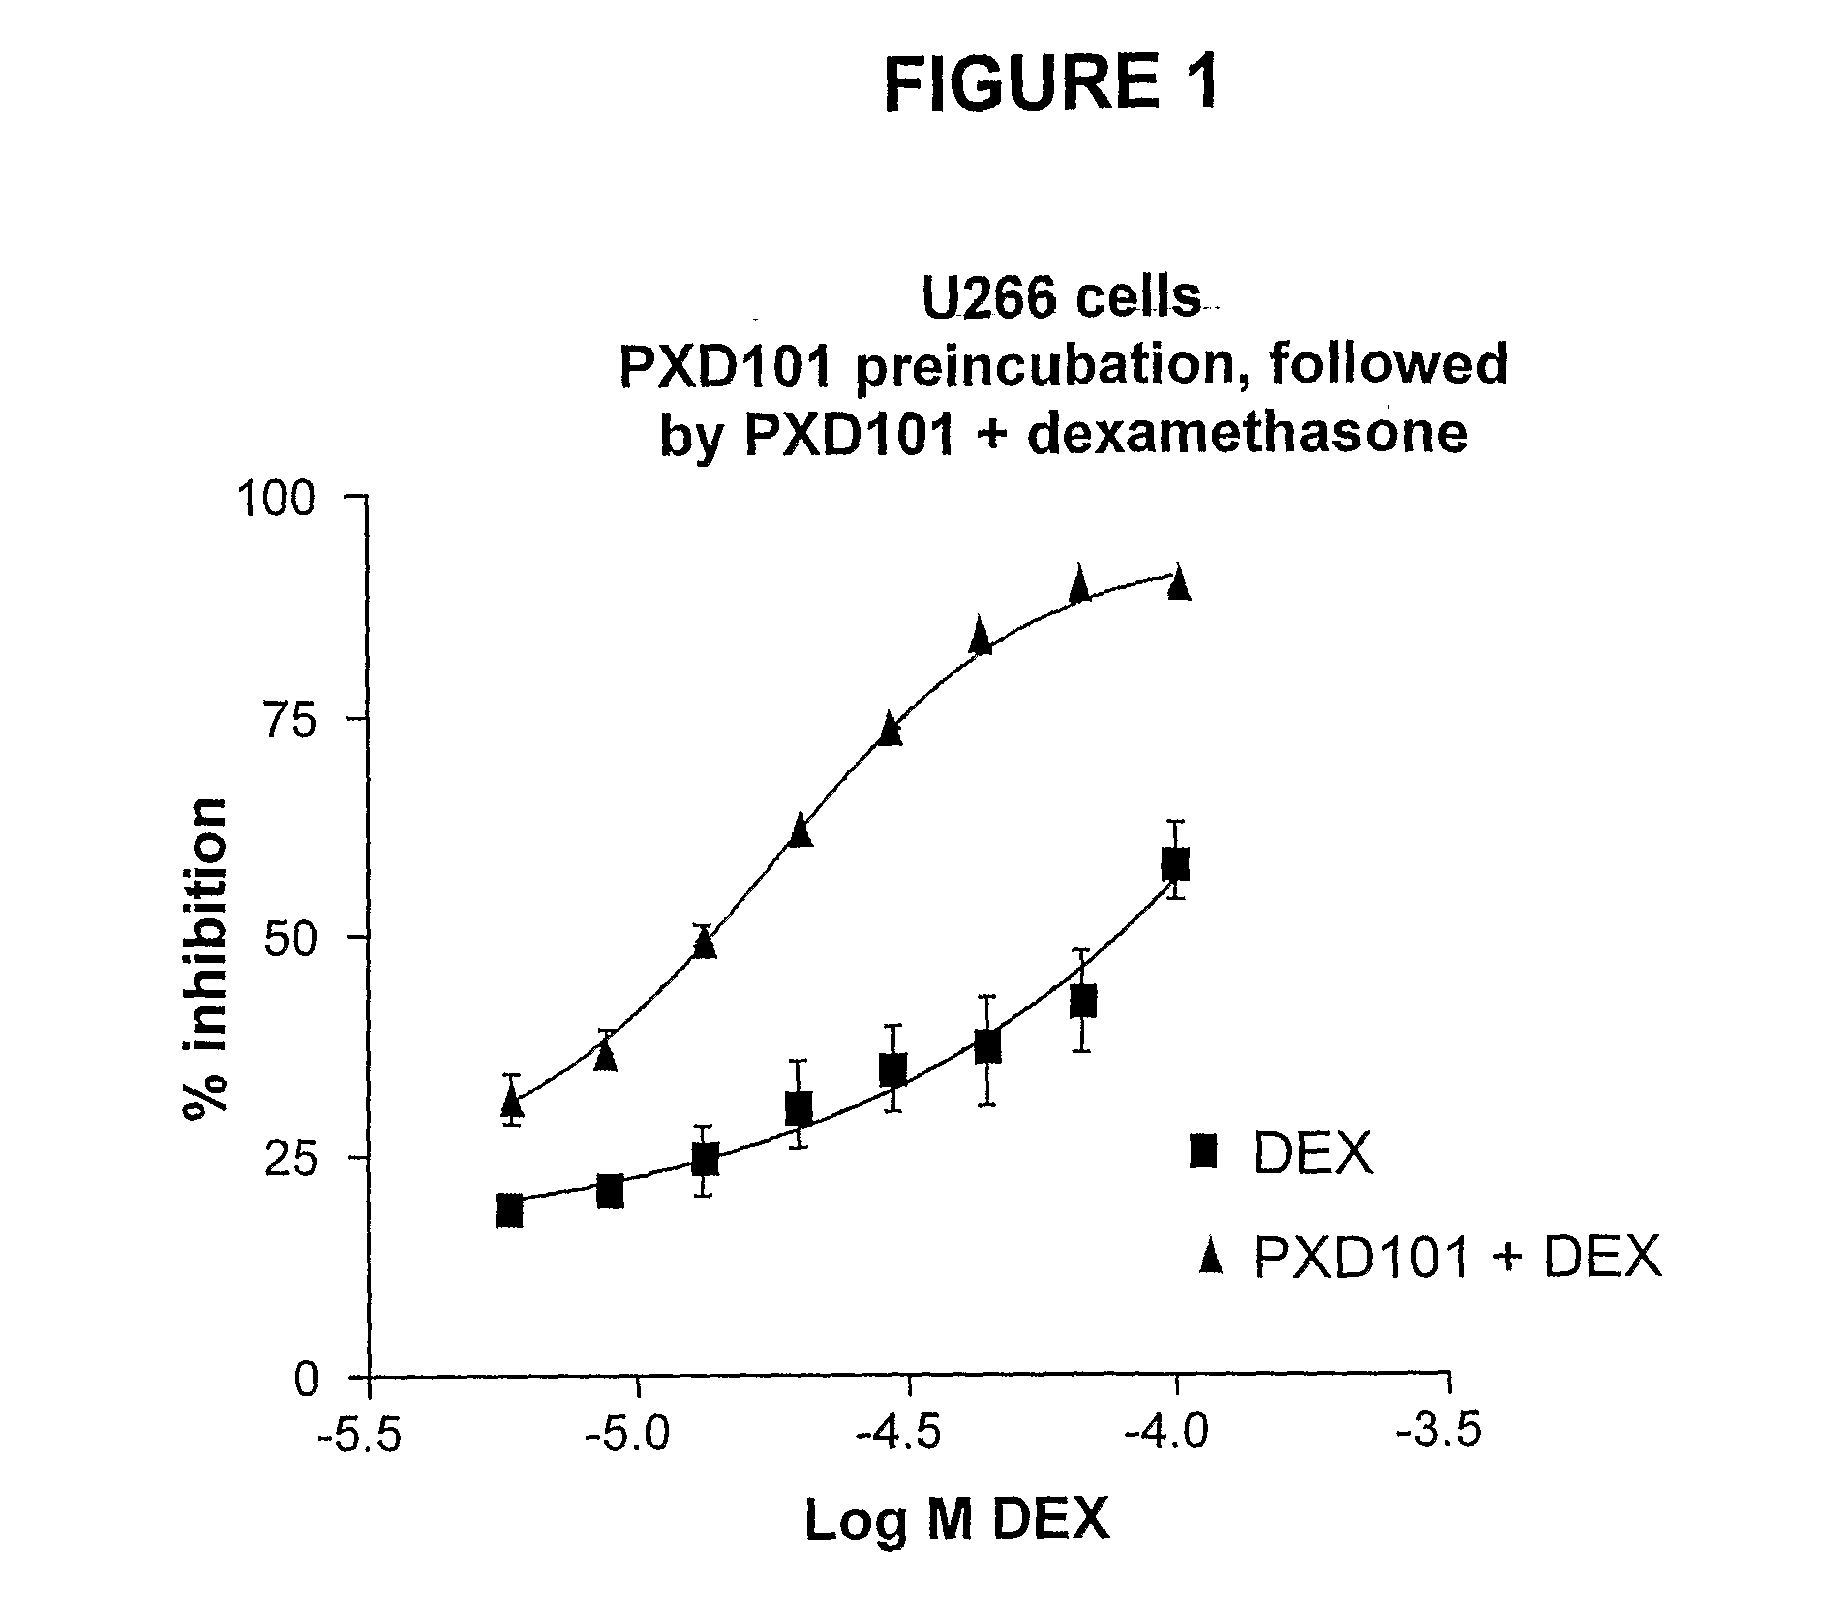 Histone Deacetylase (Hdac) Inhibitors (Pxd101) for the Treatment of Cancer Alone or in Combination With Chemotherapeutic Agent